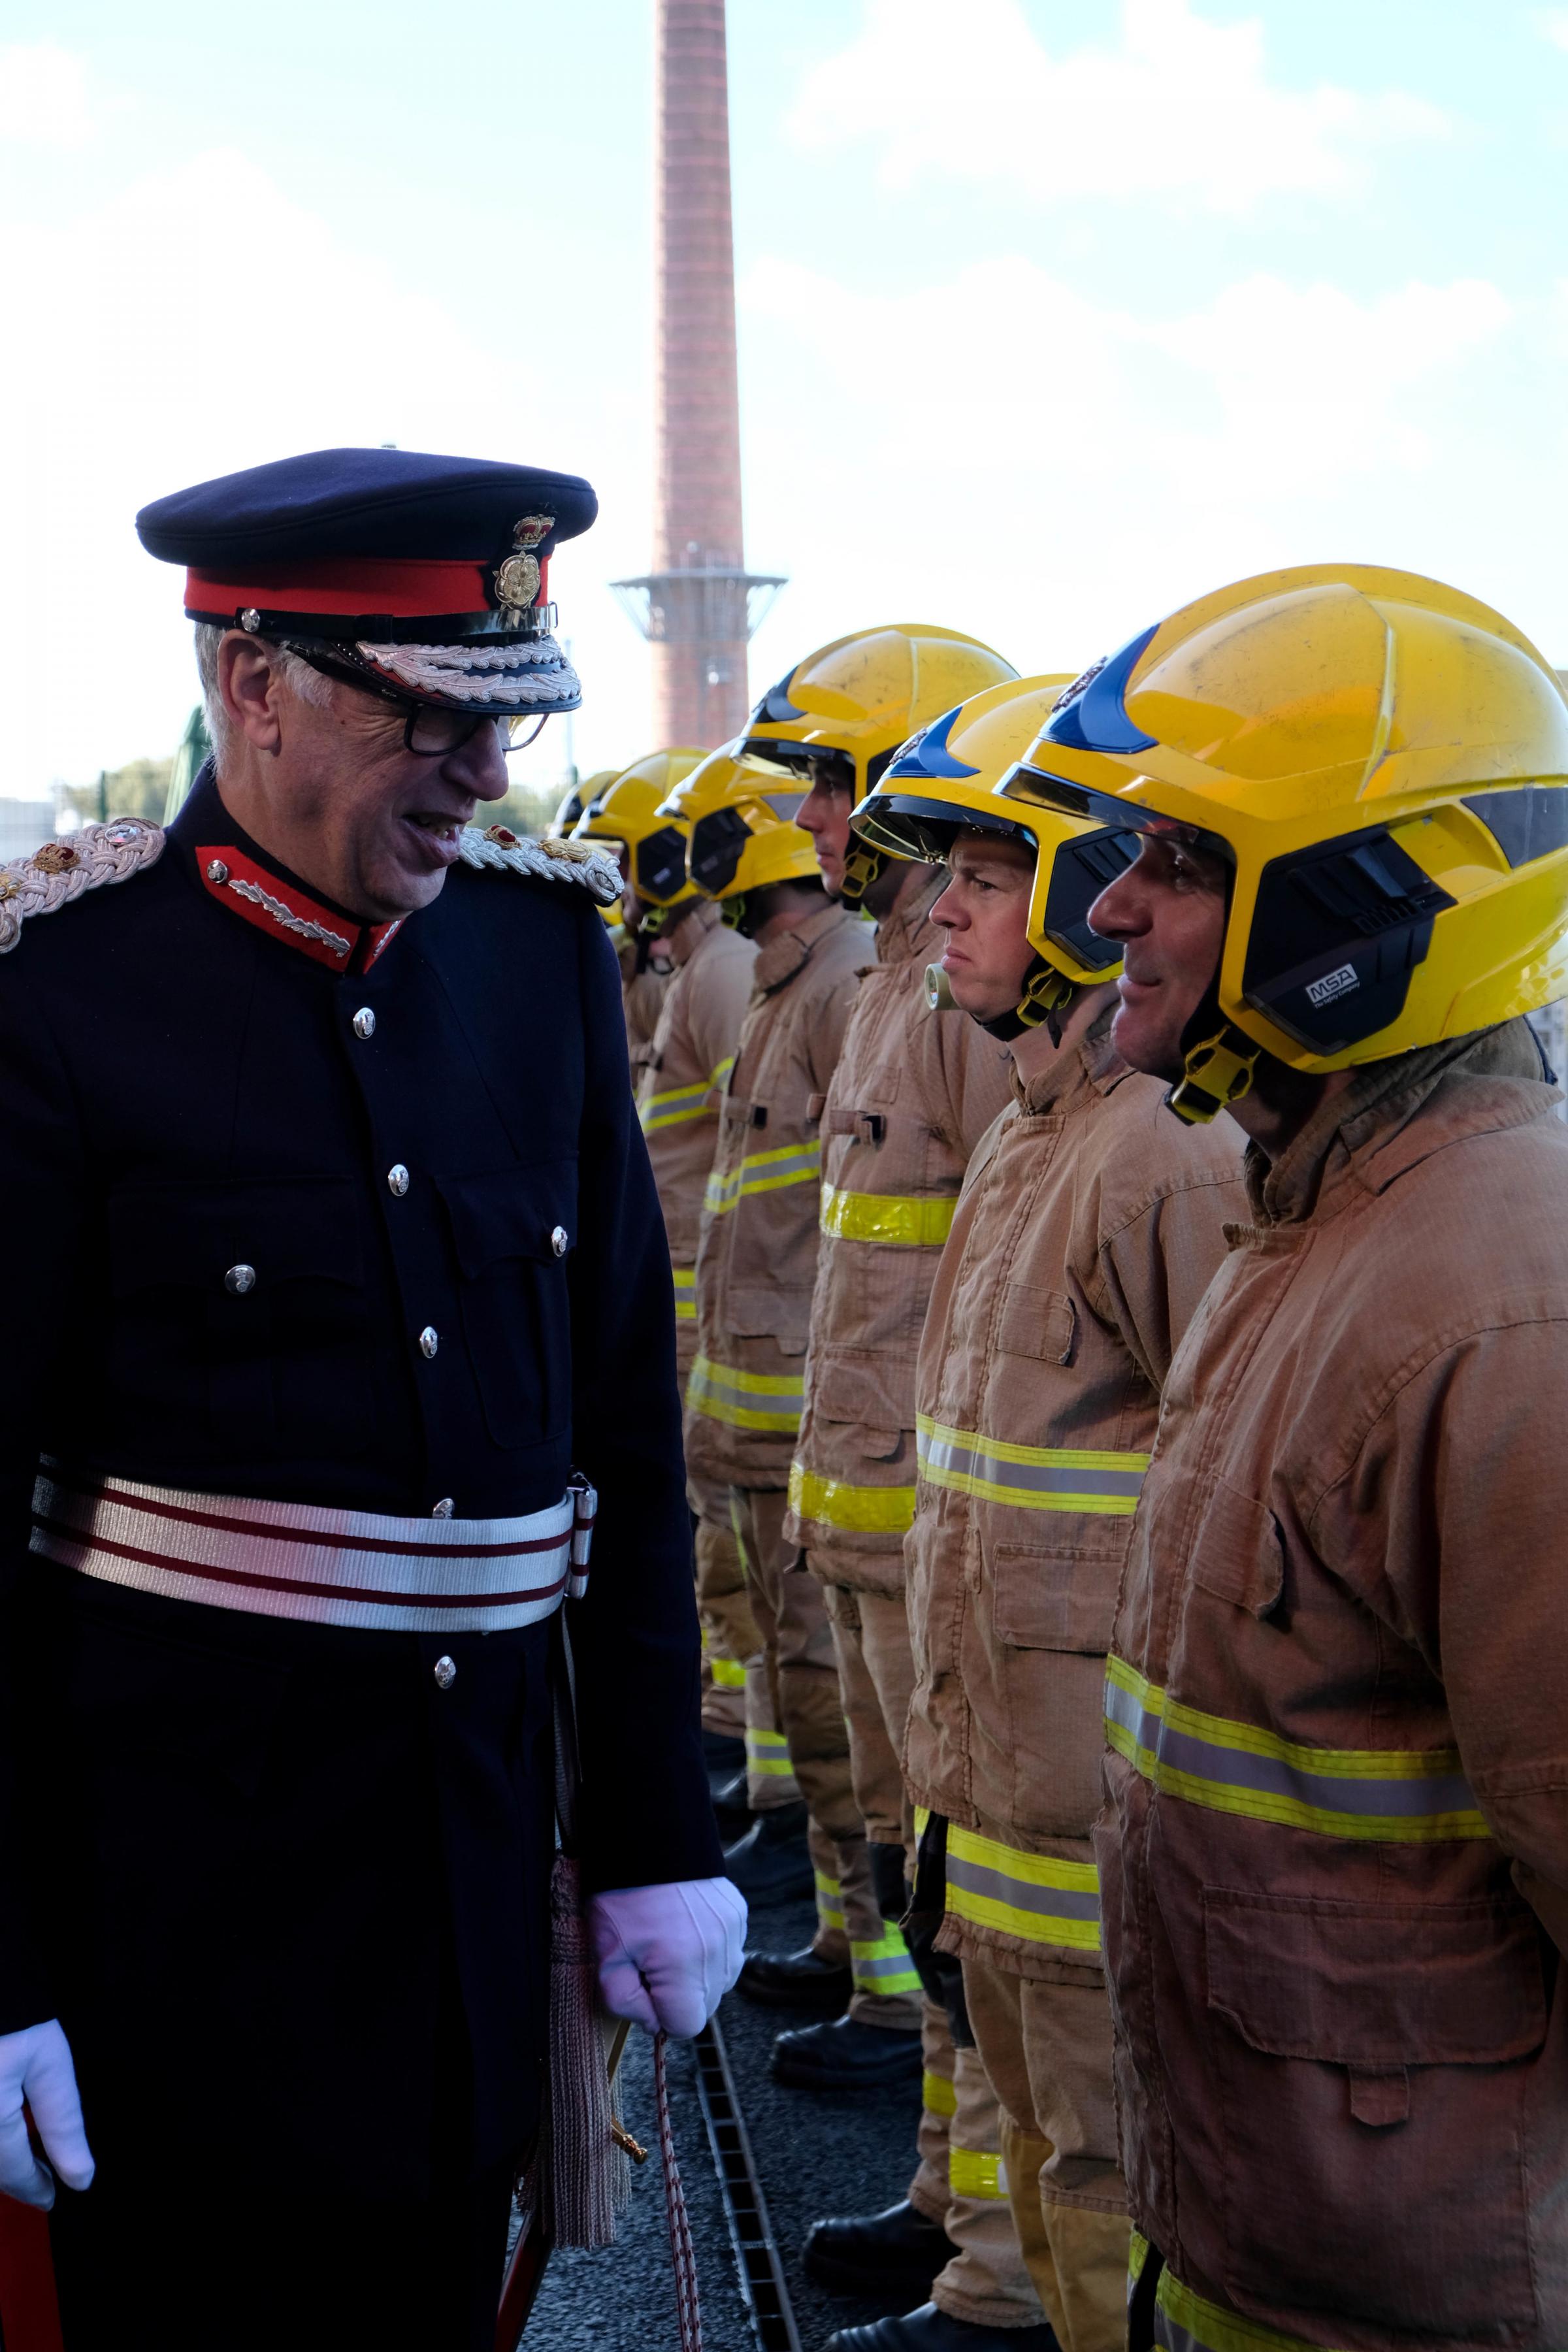 The Lord Lieutenant of Merseyside meets the crew